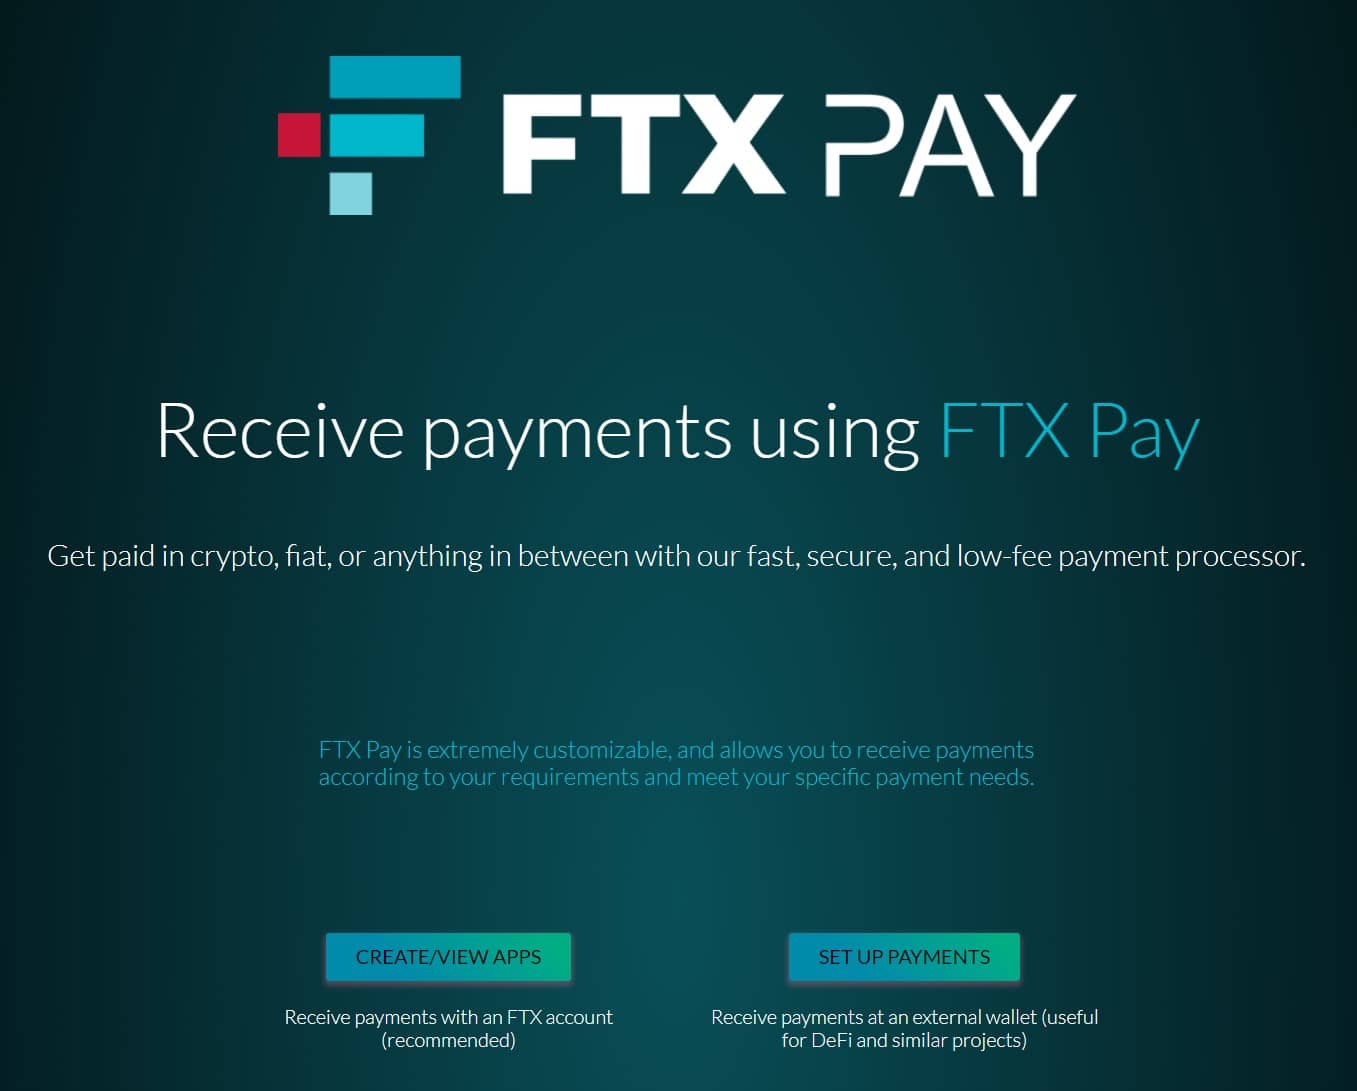 FTX Pay